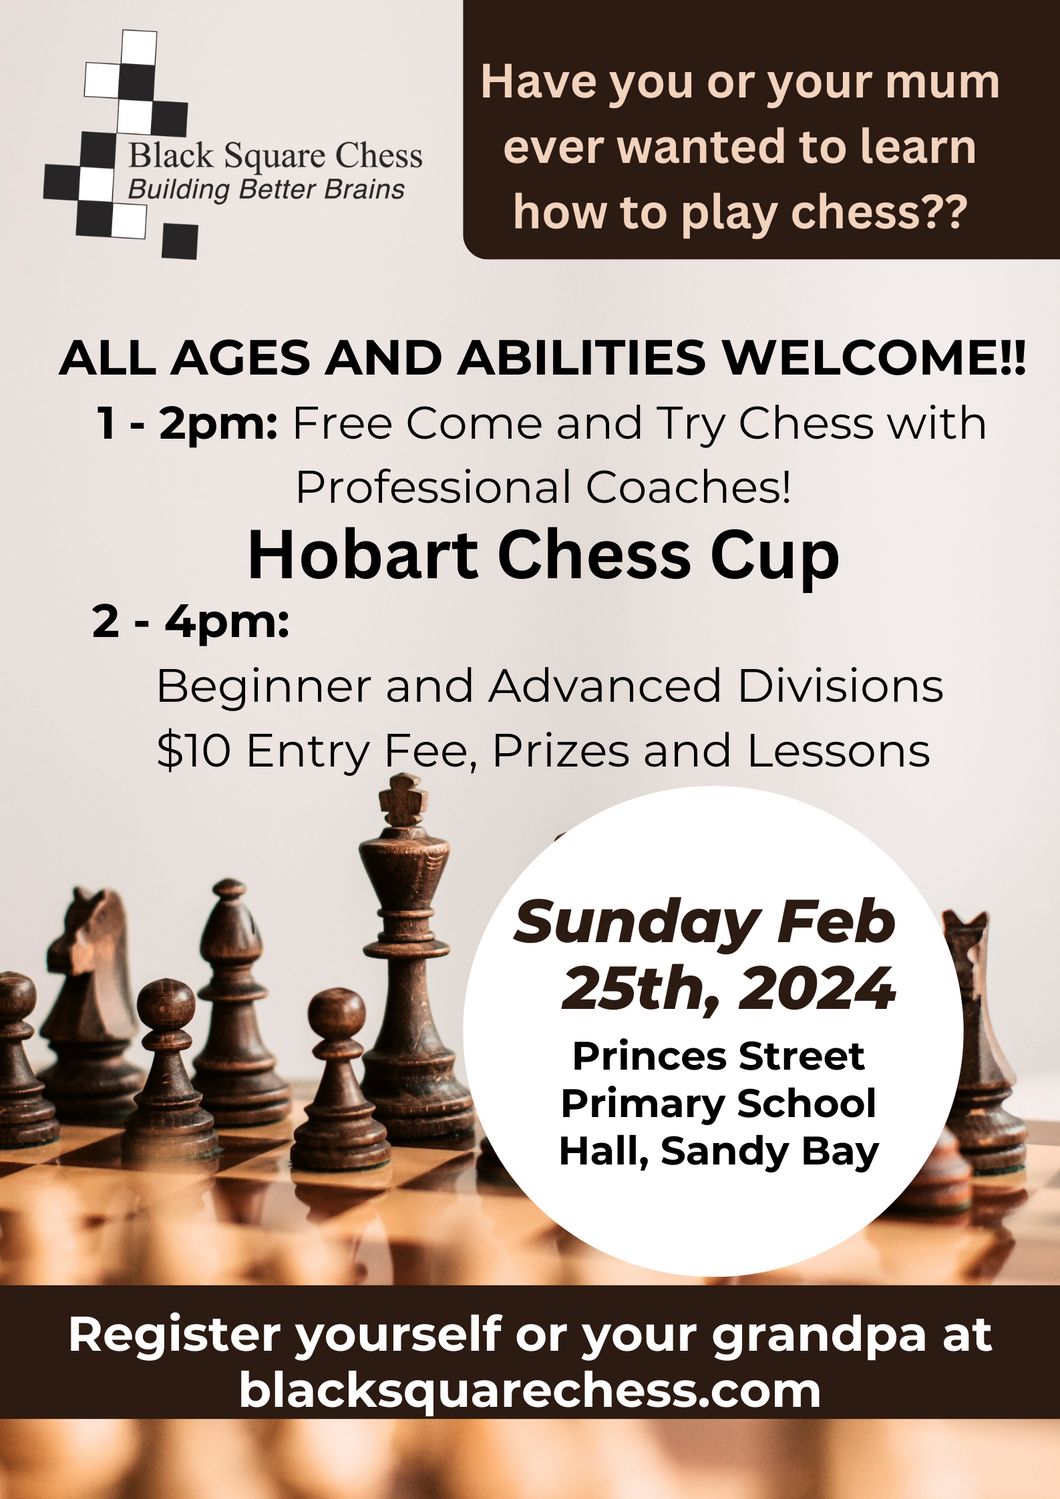 Hobart Chess Cup